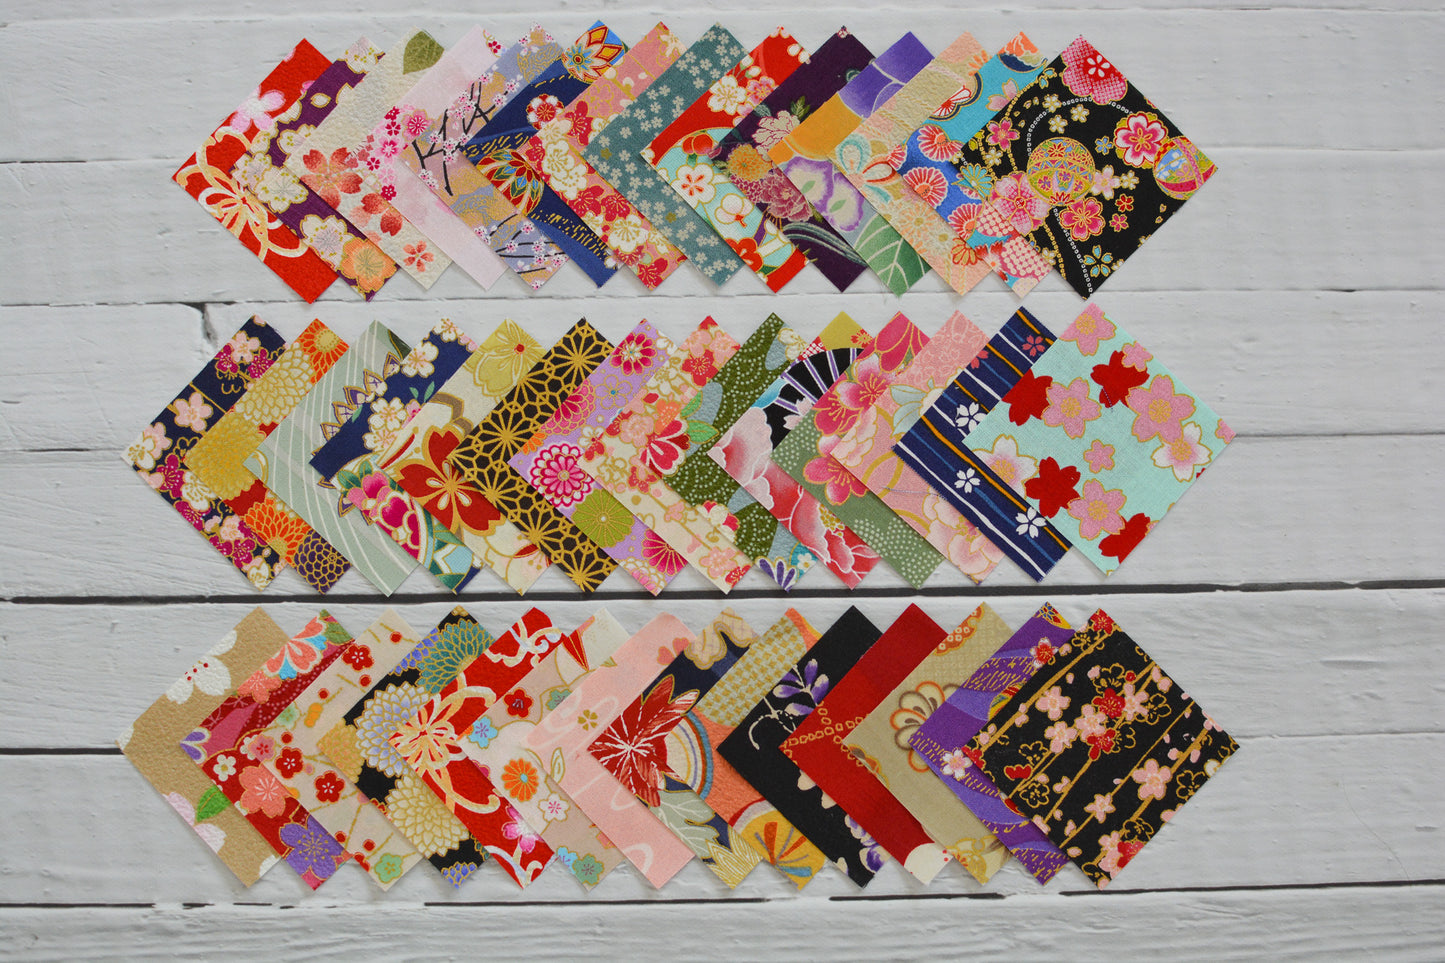 Japanese Fabric 3.5" x 3.5" squares - 42 pieces assortment of all different prints